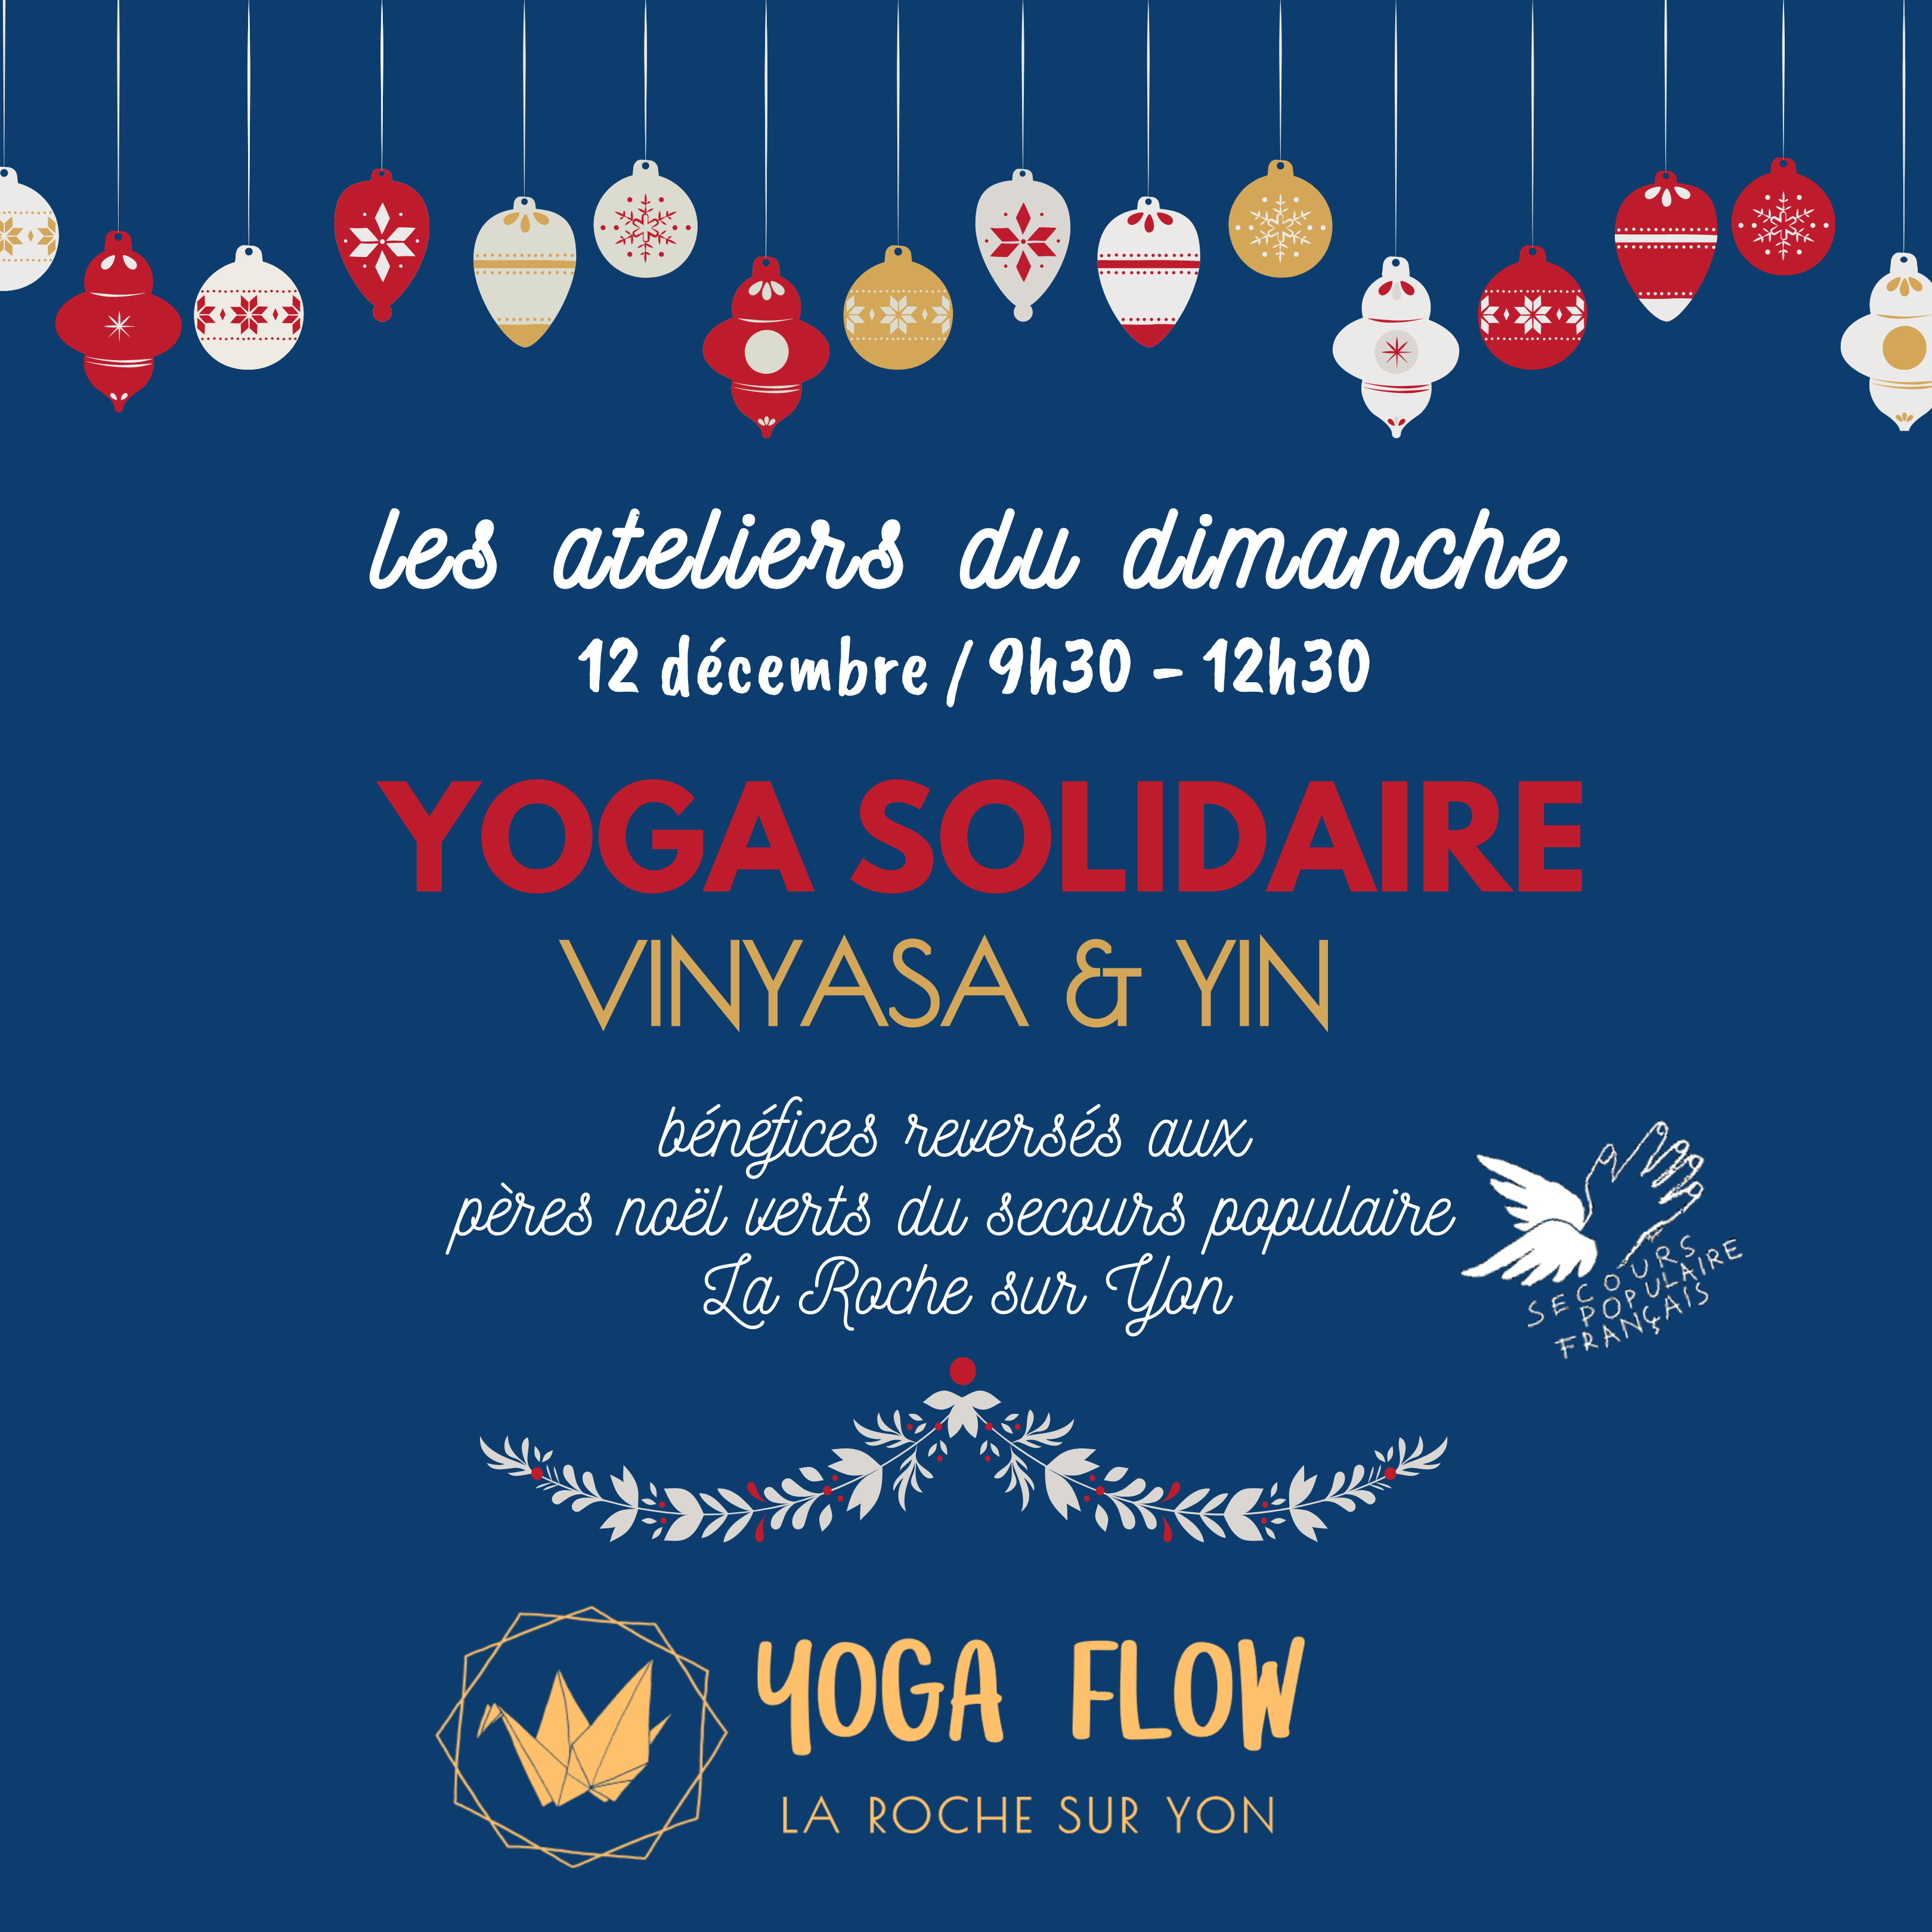 Atelier yoga solidaire ouvrir son coeur